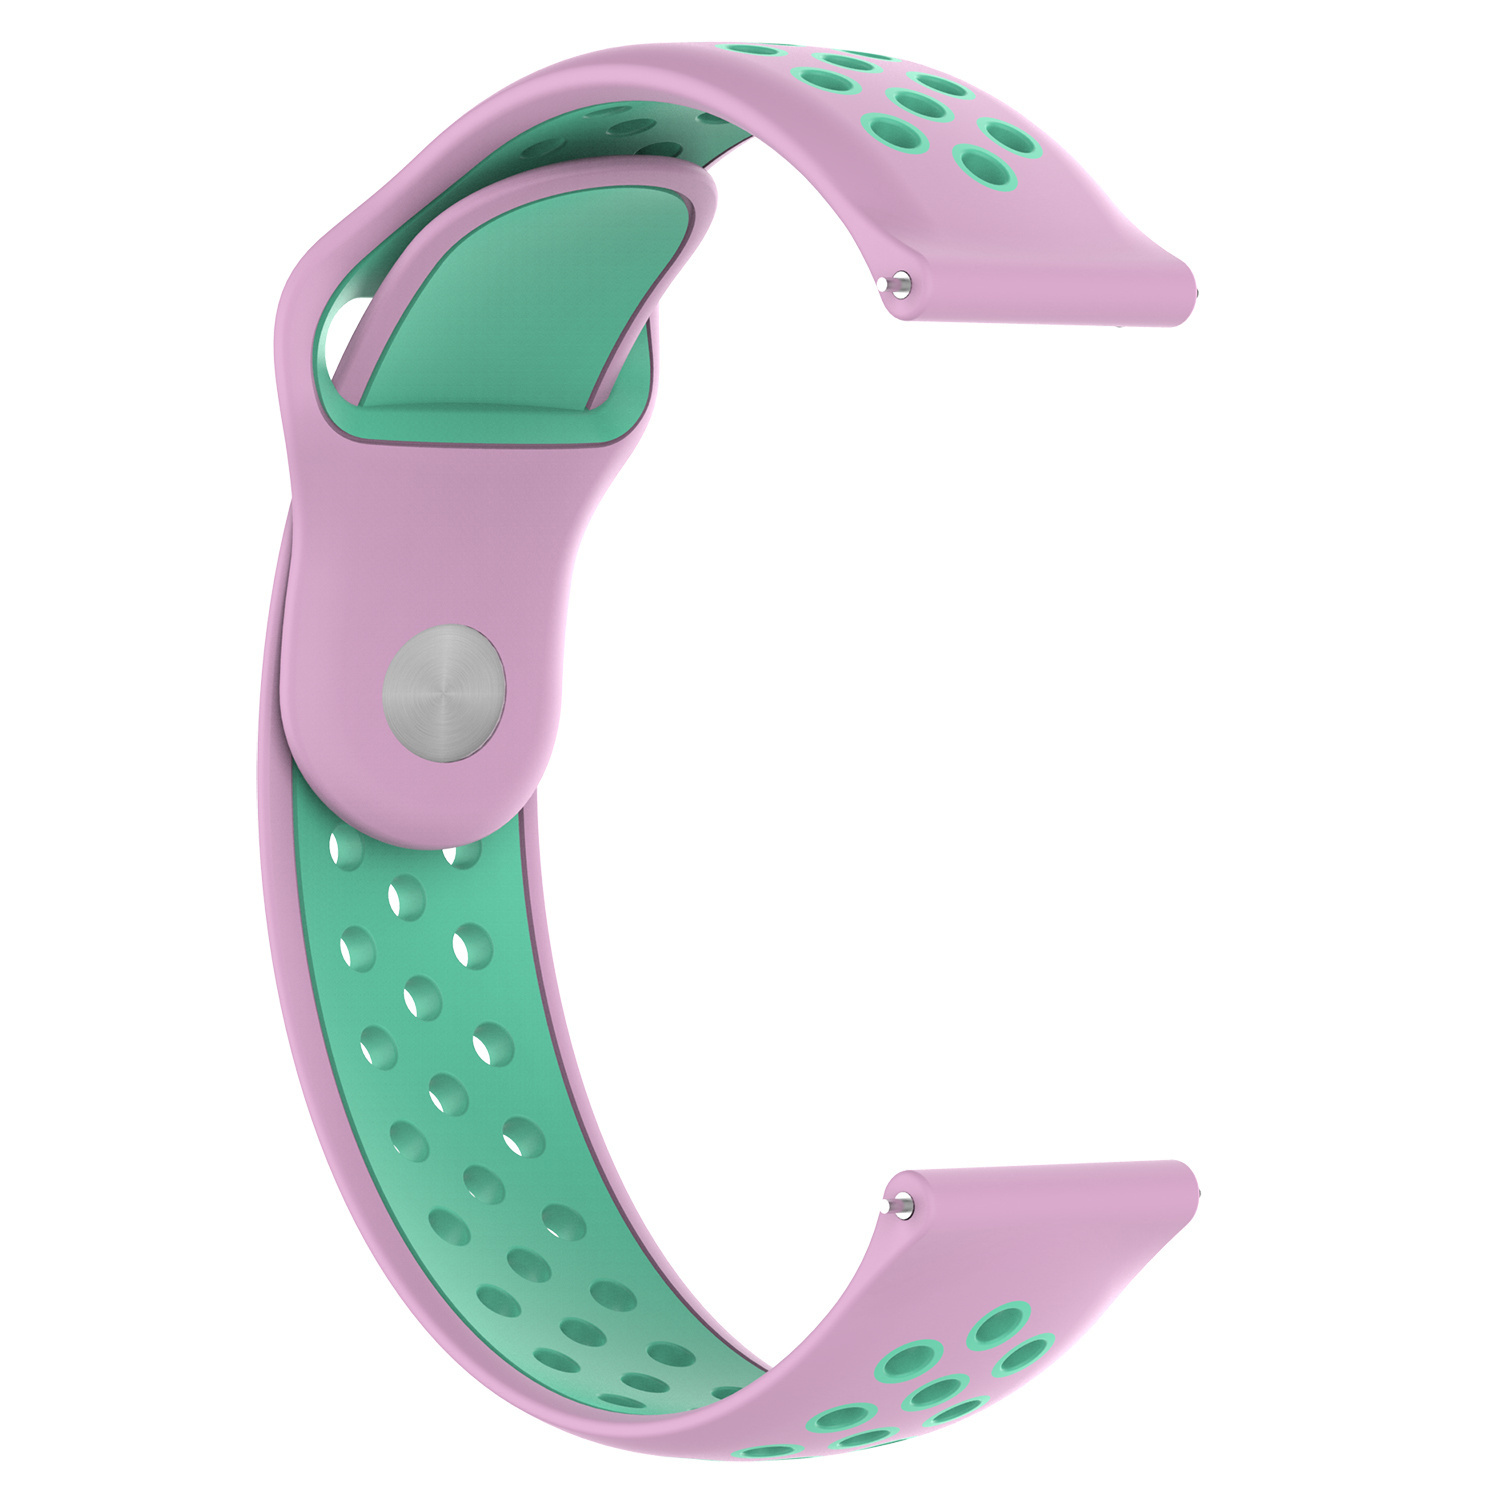 Samsung Galaxy Watch Double Sport Strap - Pink Teal